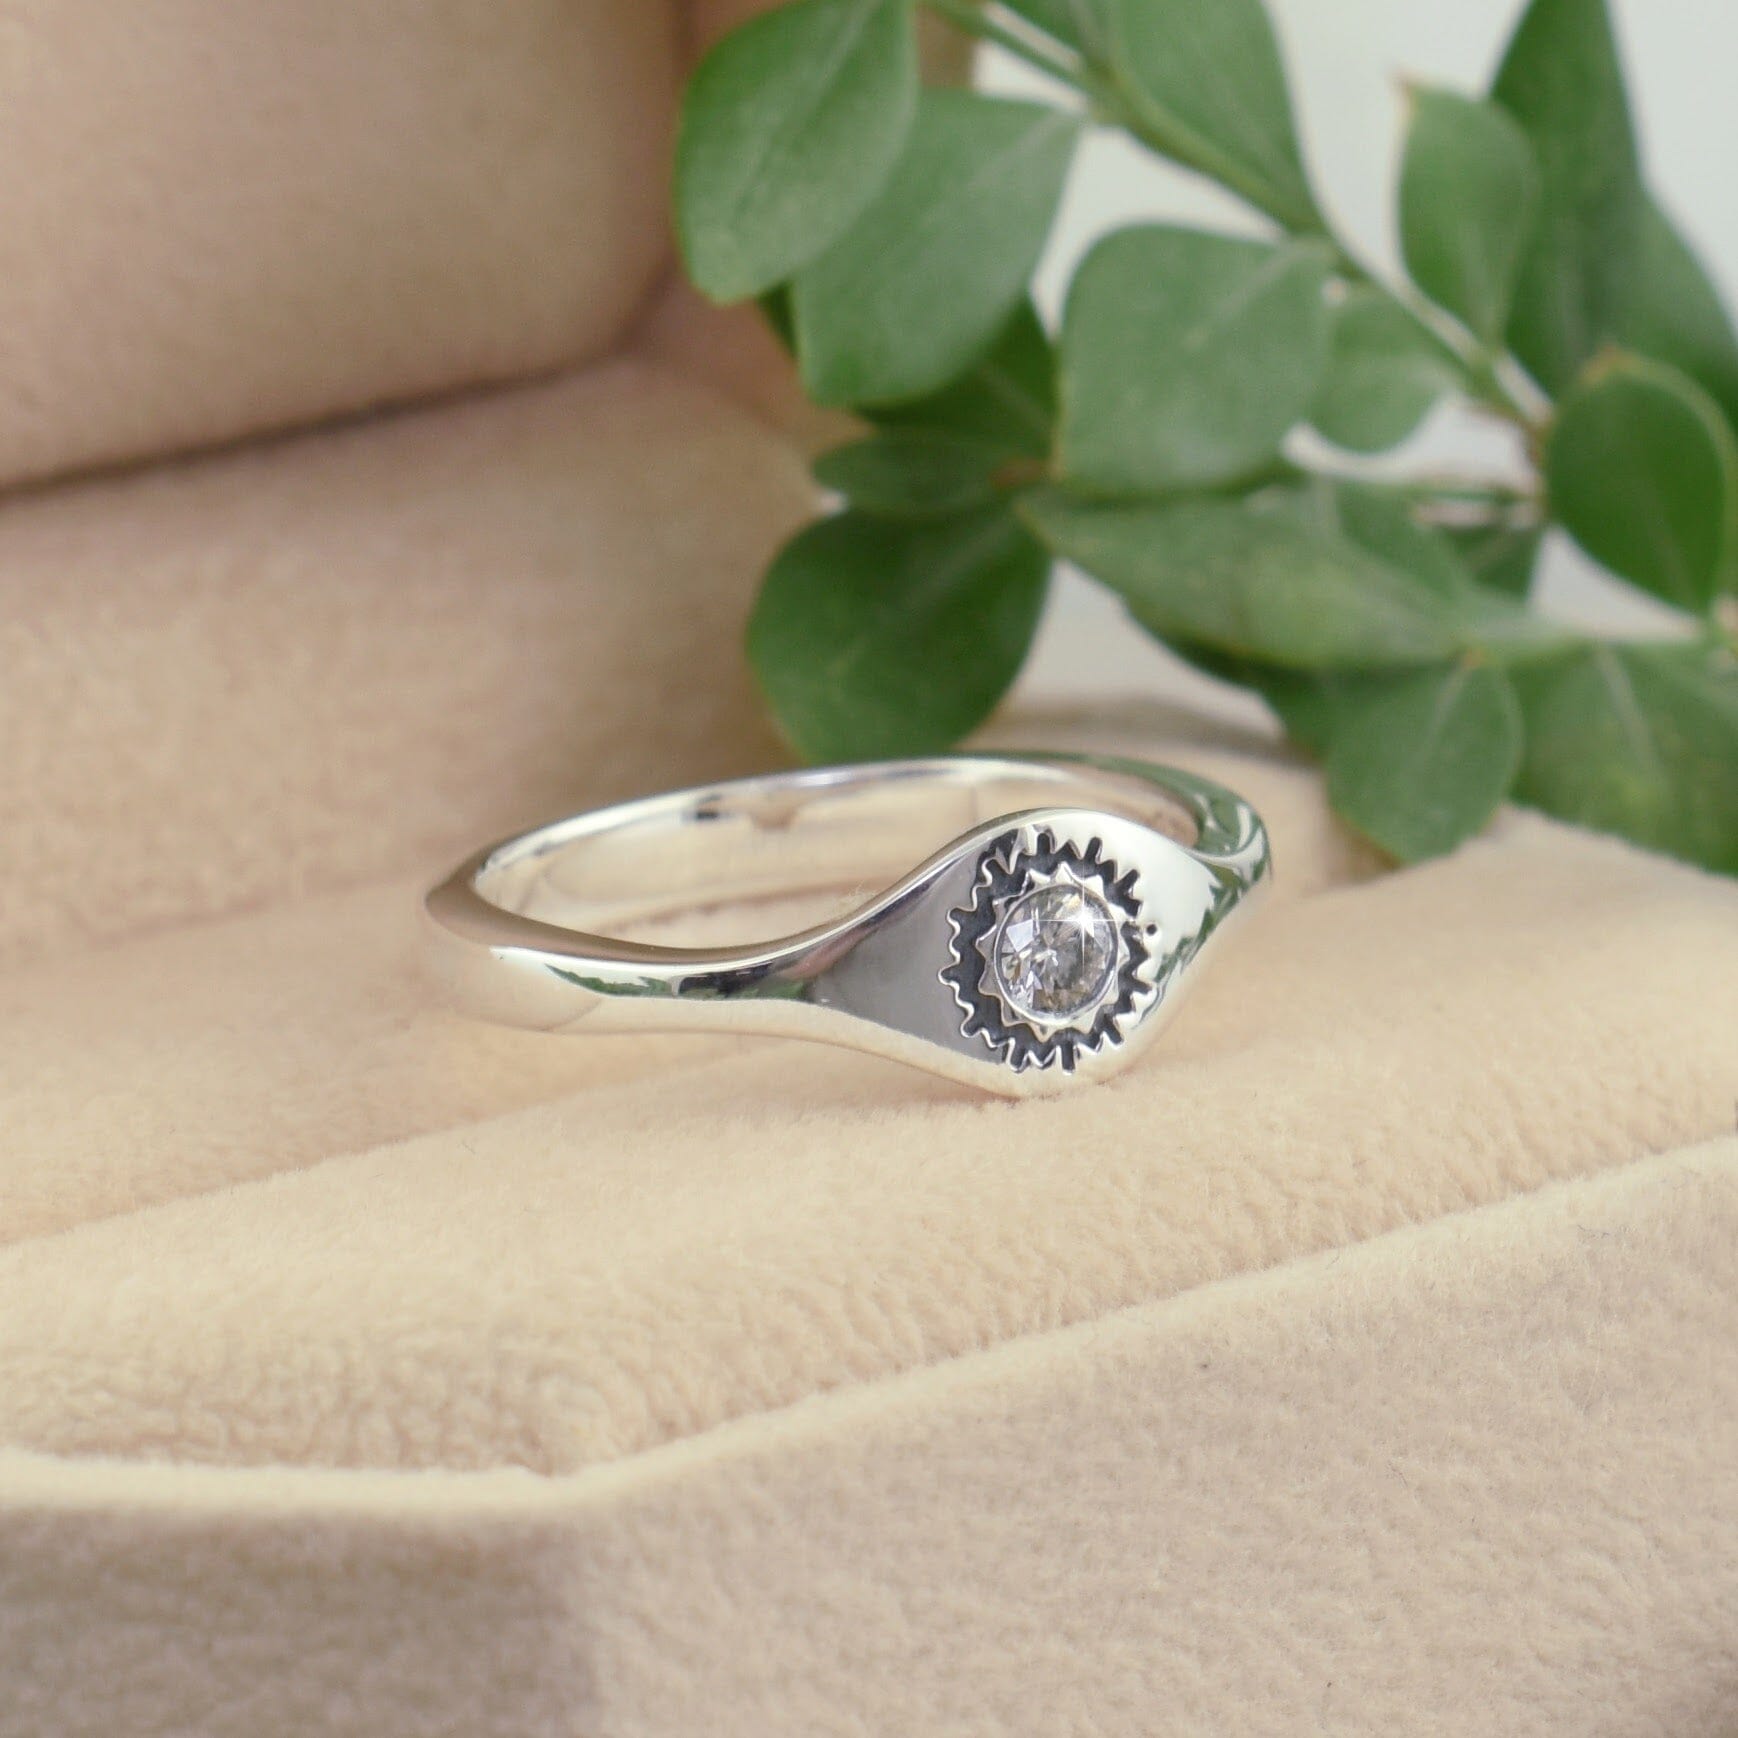 dainty .925 sterling silver ring featuring a diamond with oxidation around the stone